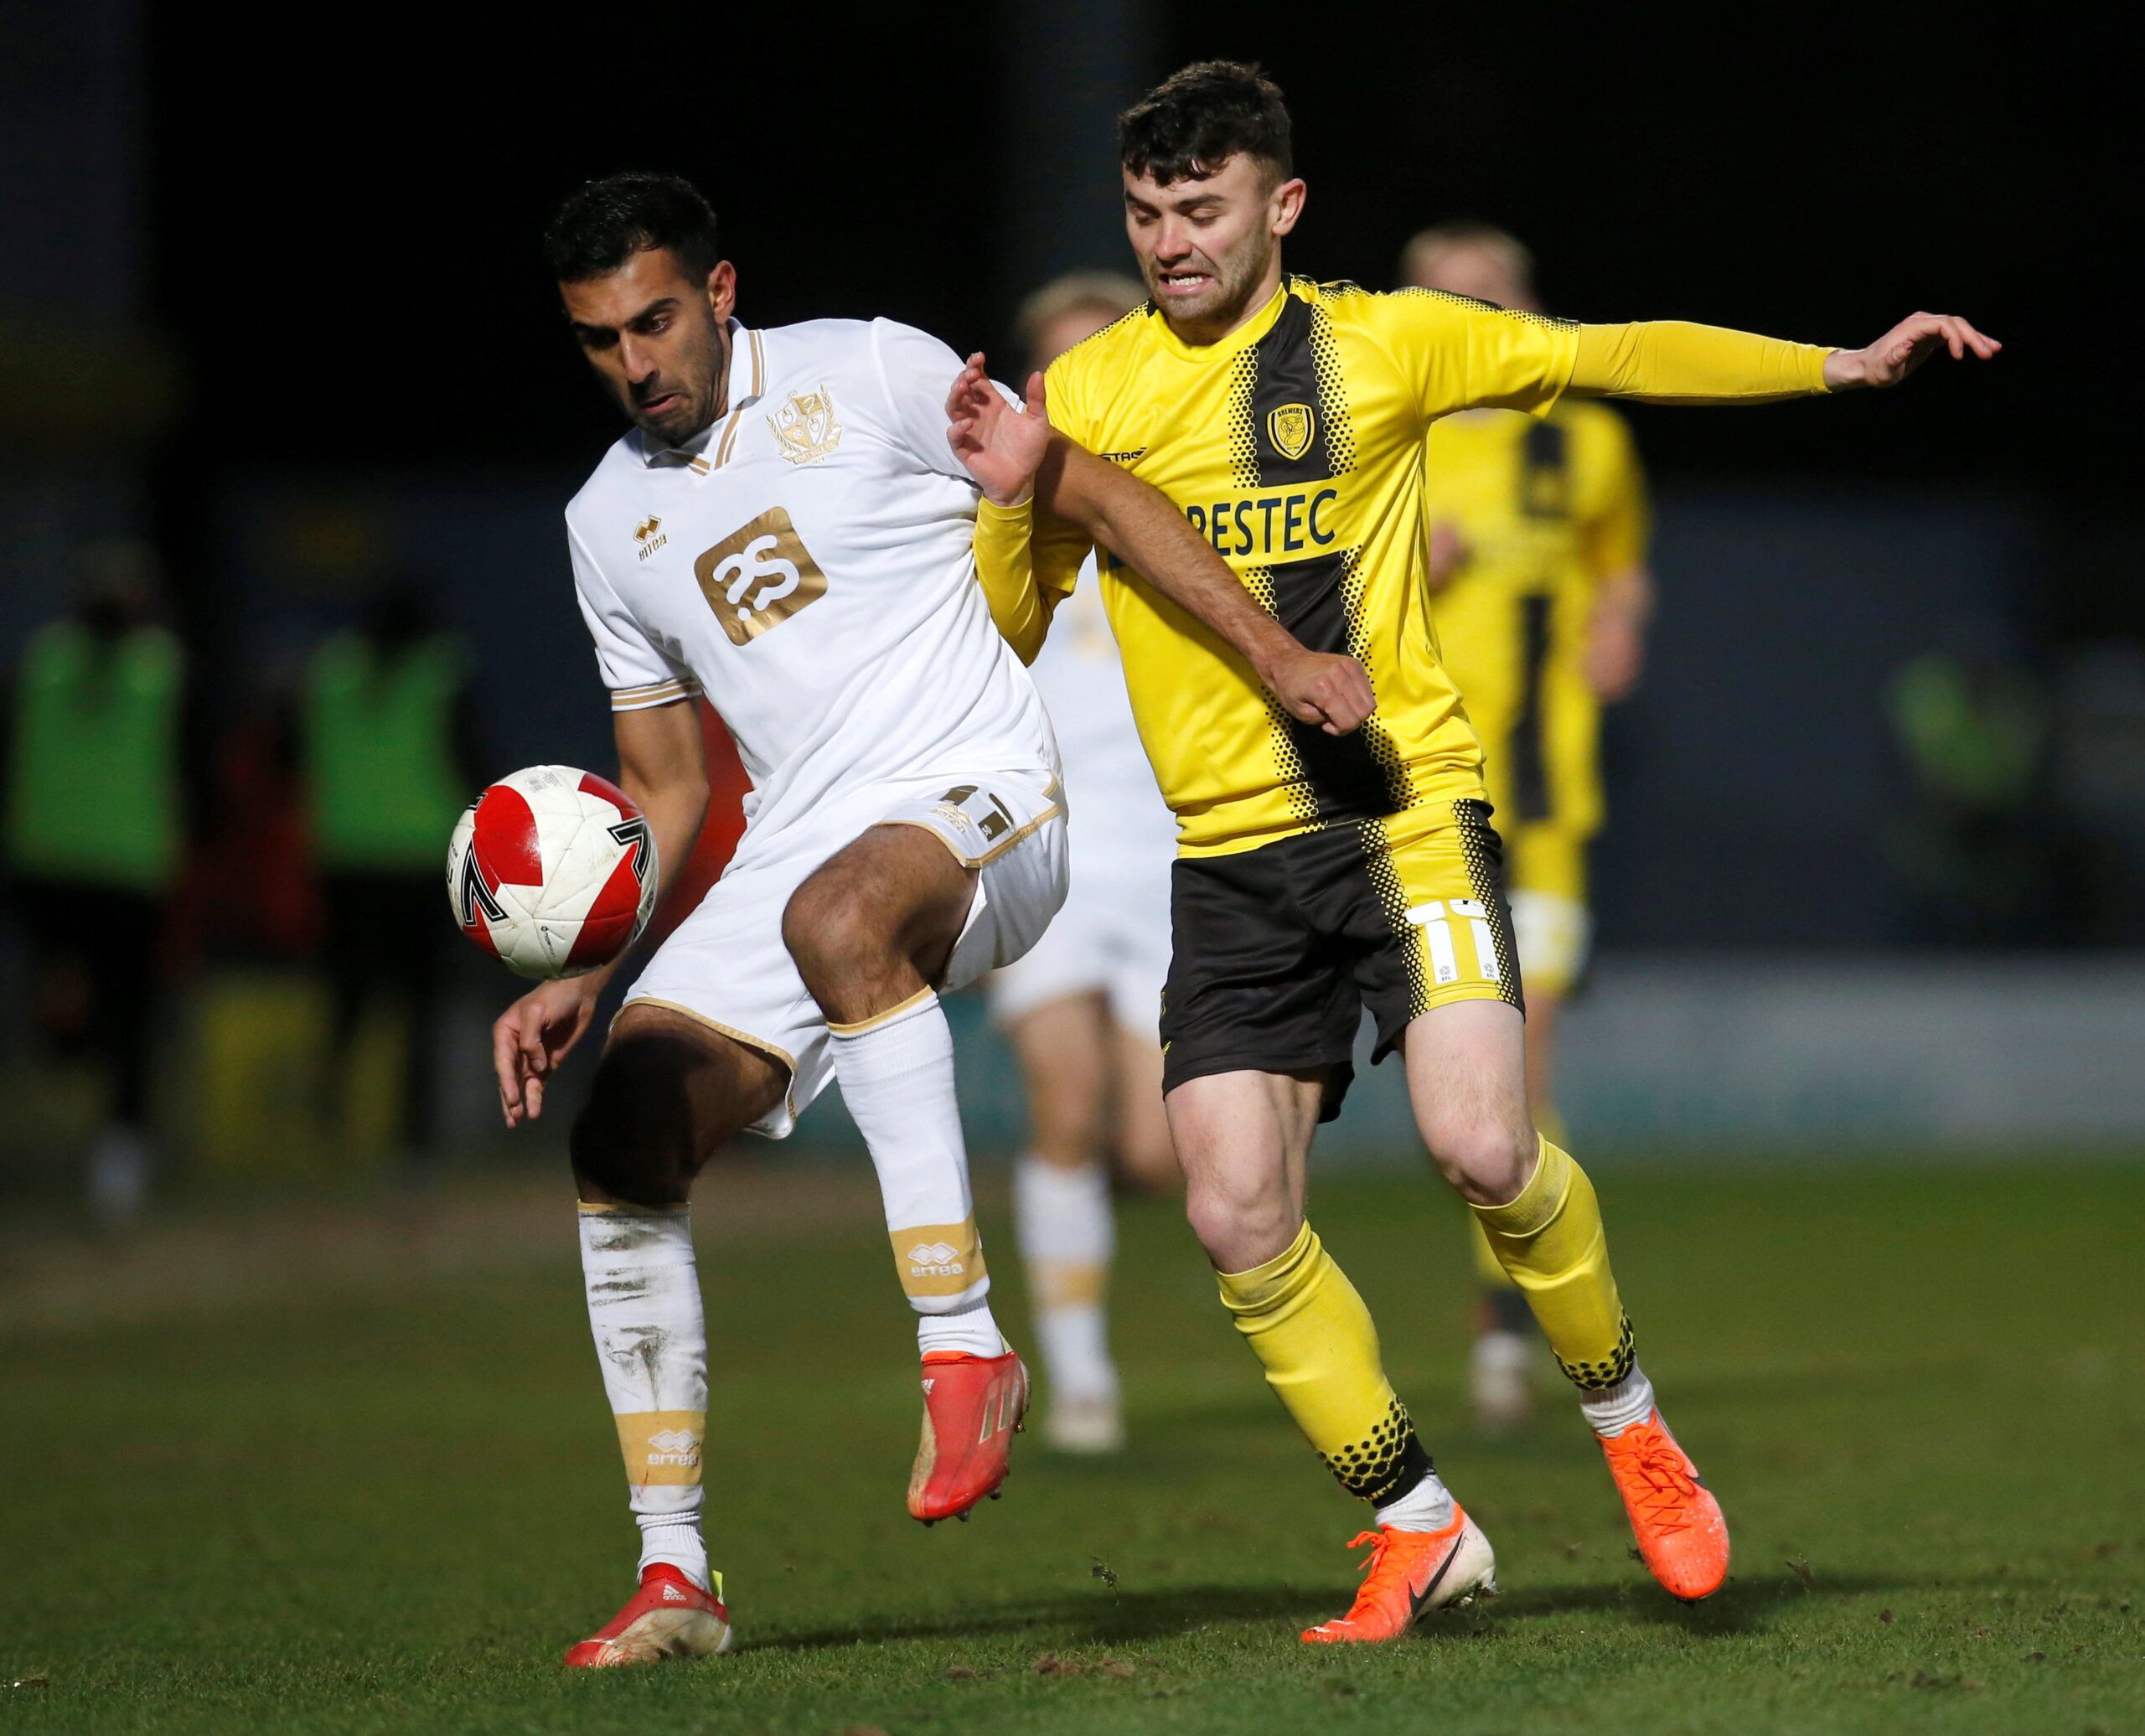 Soccer Football - FA Cup Second Round - Burton Albion v Port Vale - Pirelli Stadium, Burton-on-Trent, Britain - December 4, 2021 Port Vale's Mal Benning in action with Burton Albion's Jonny Smith   Action Images/Ed Sykes